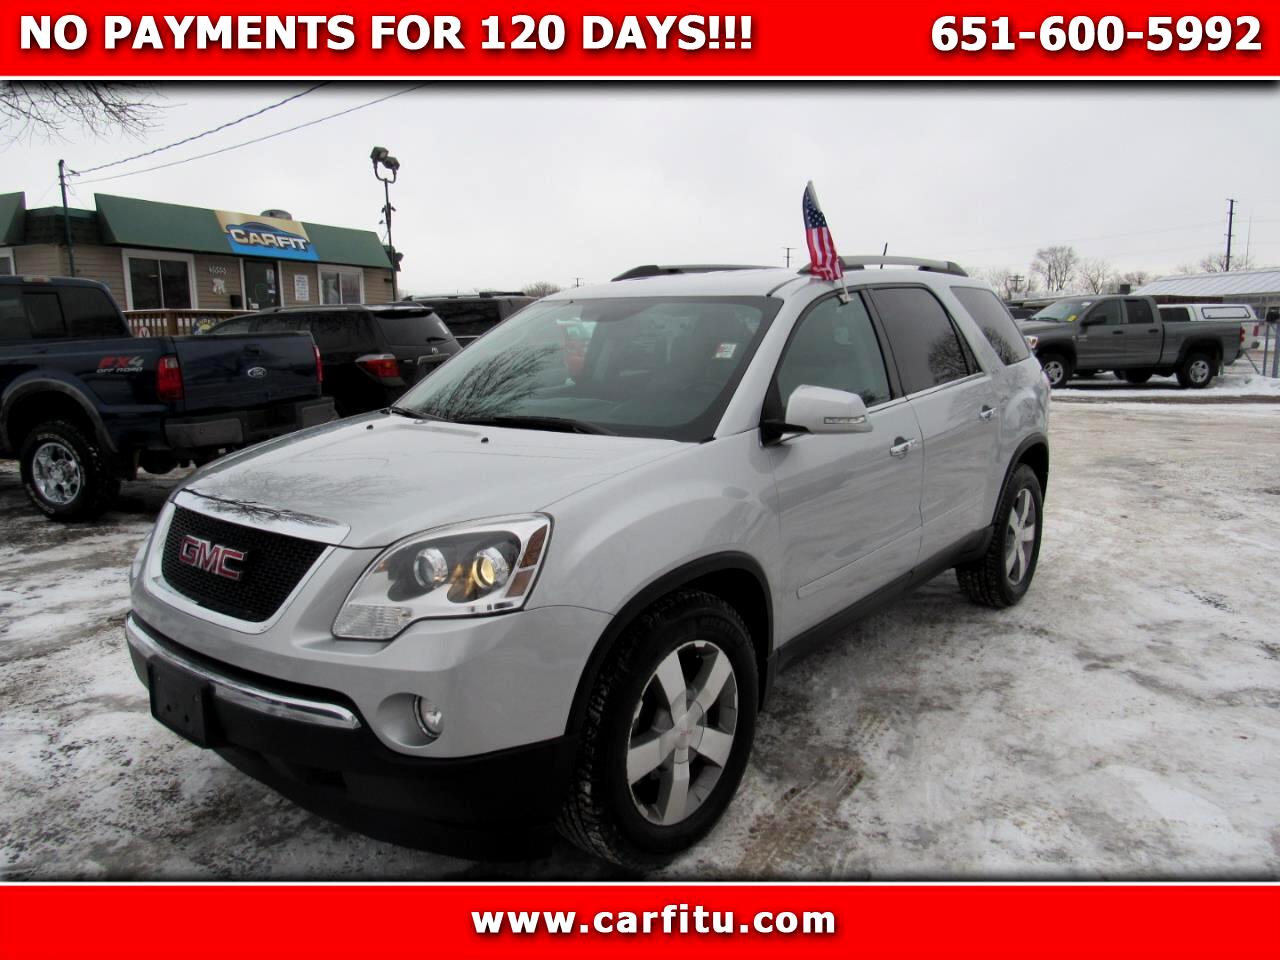 Used 2012 Gmc Acadia Awd 4dr Slt2 For Sale In White Bear Lake Mn